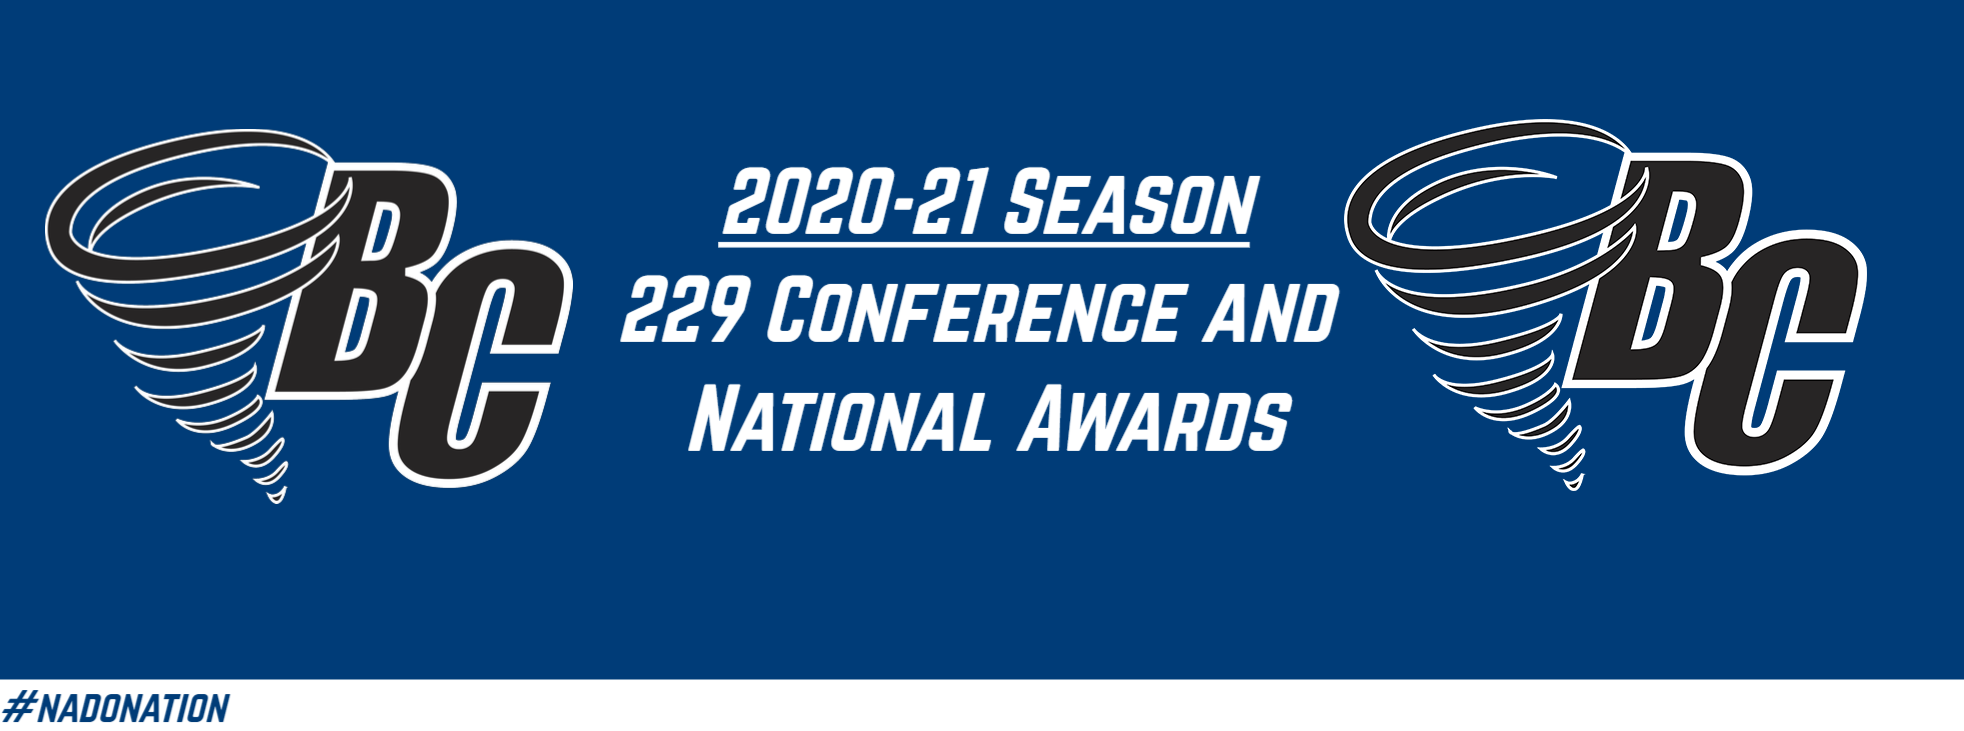 Brevard College Student-Athletes Collect 229 Conference and National Awards in 2020-21